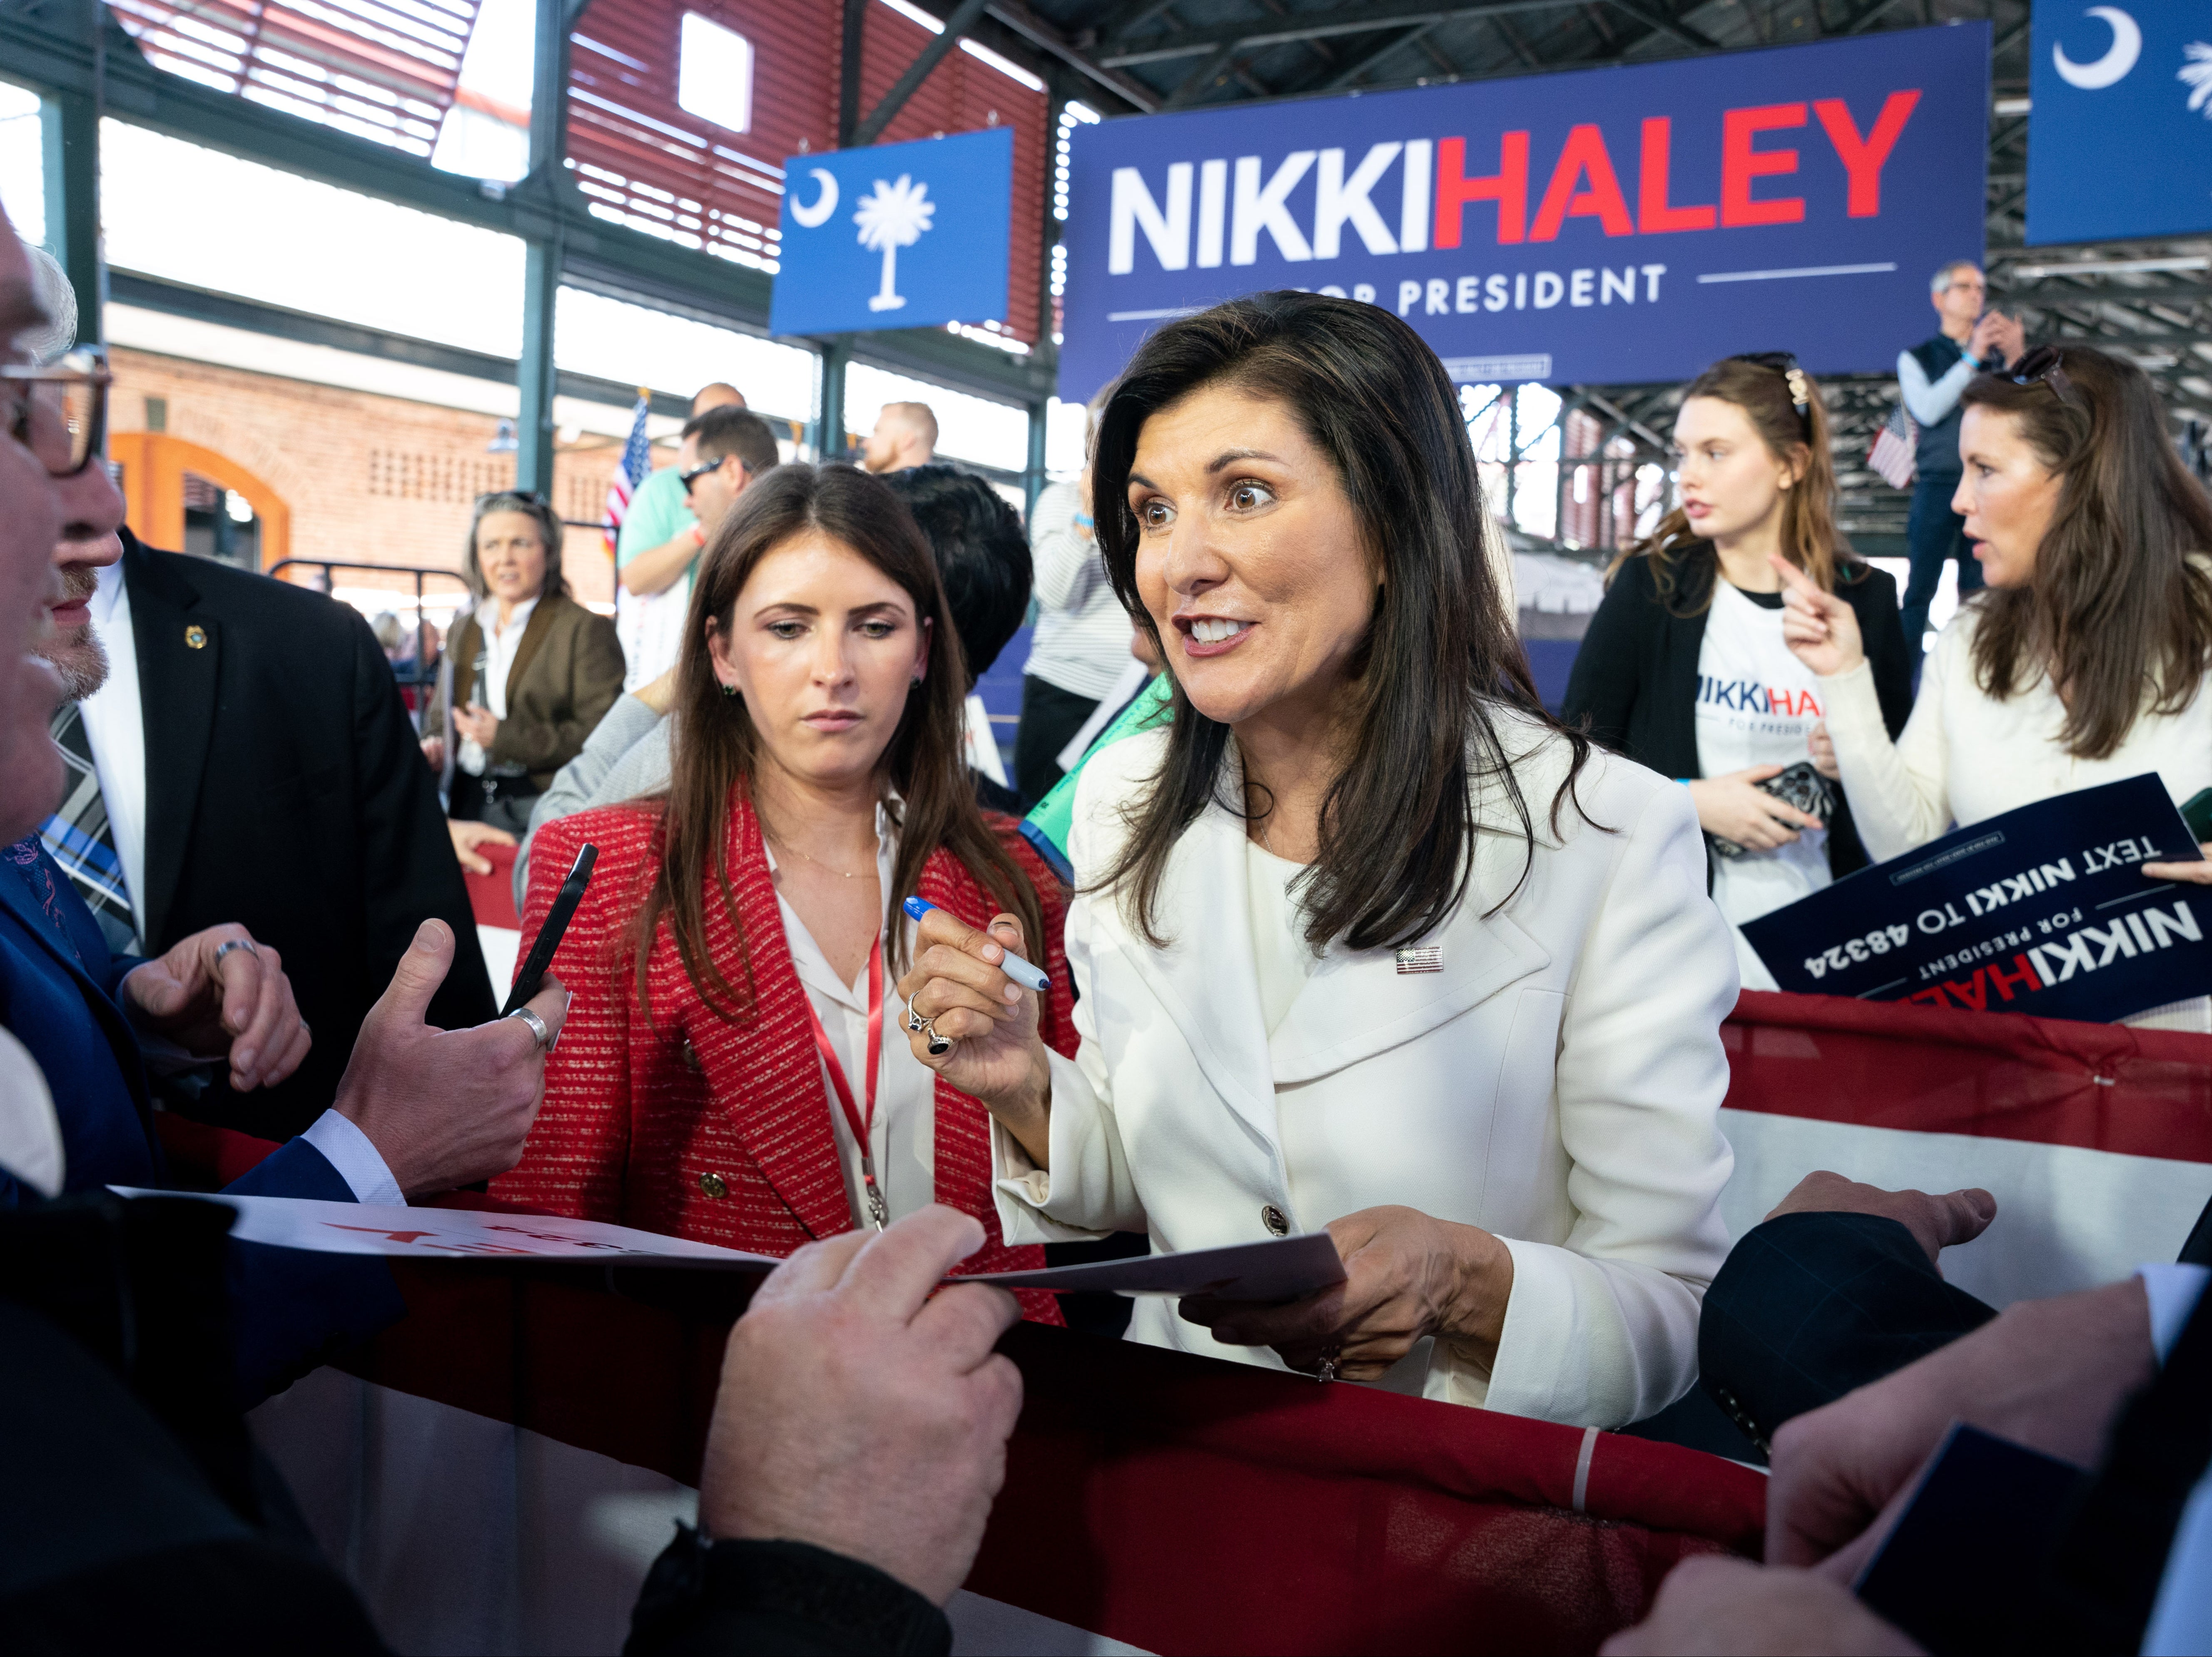 Republican presidential candidate Nikki Haley wrote a tweet attacking ‘weak and woke’ ideology the day she declared her candidacy